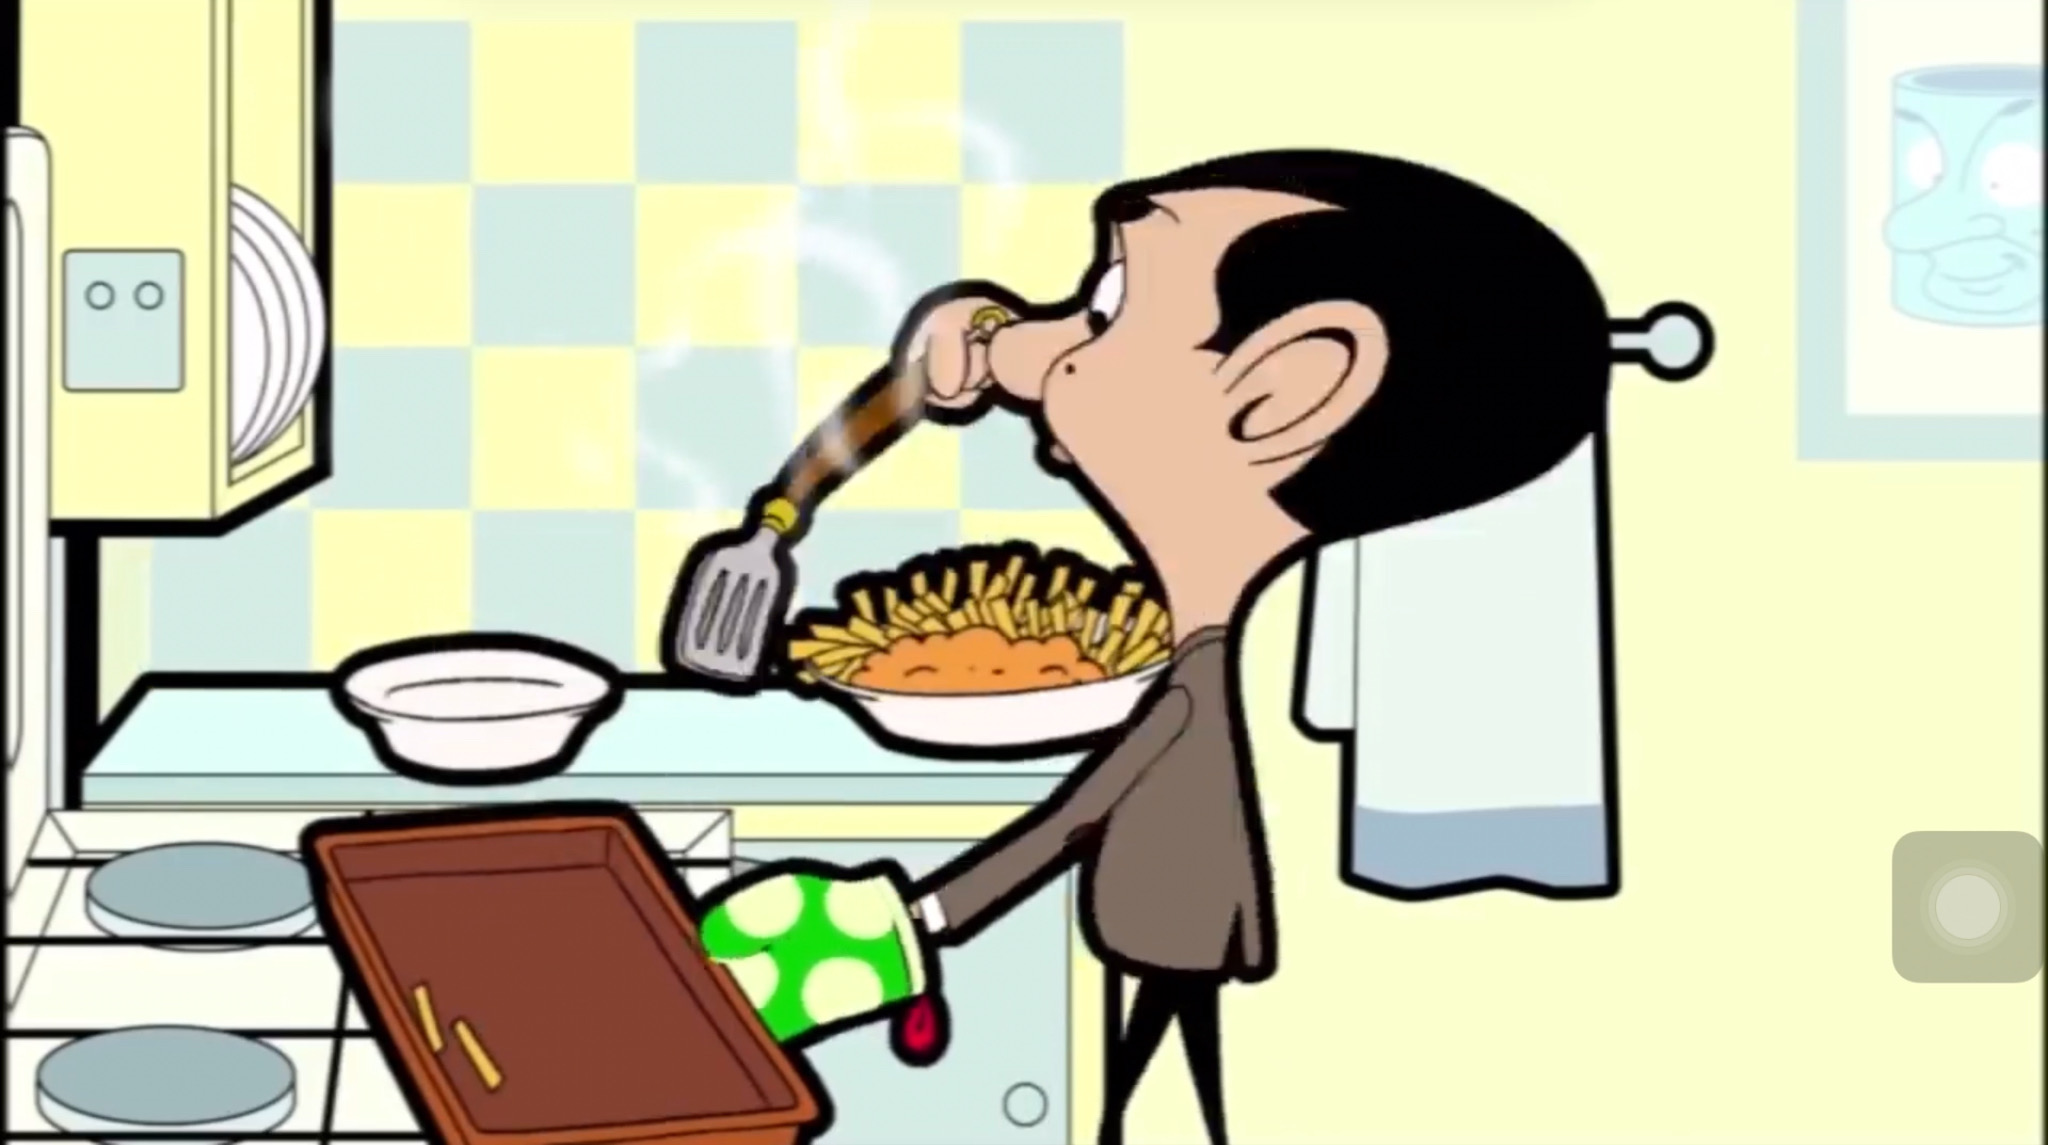 Mr Bean serving fish and chips for dinner by hueylengyong15 on DeviantArt